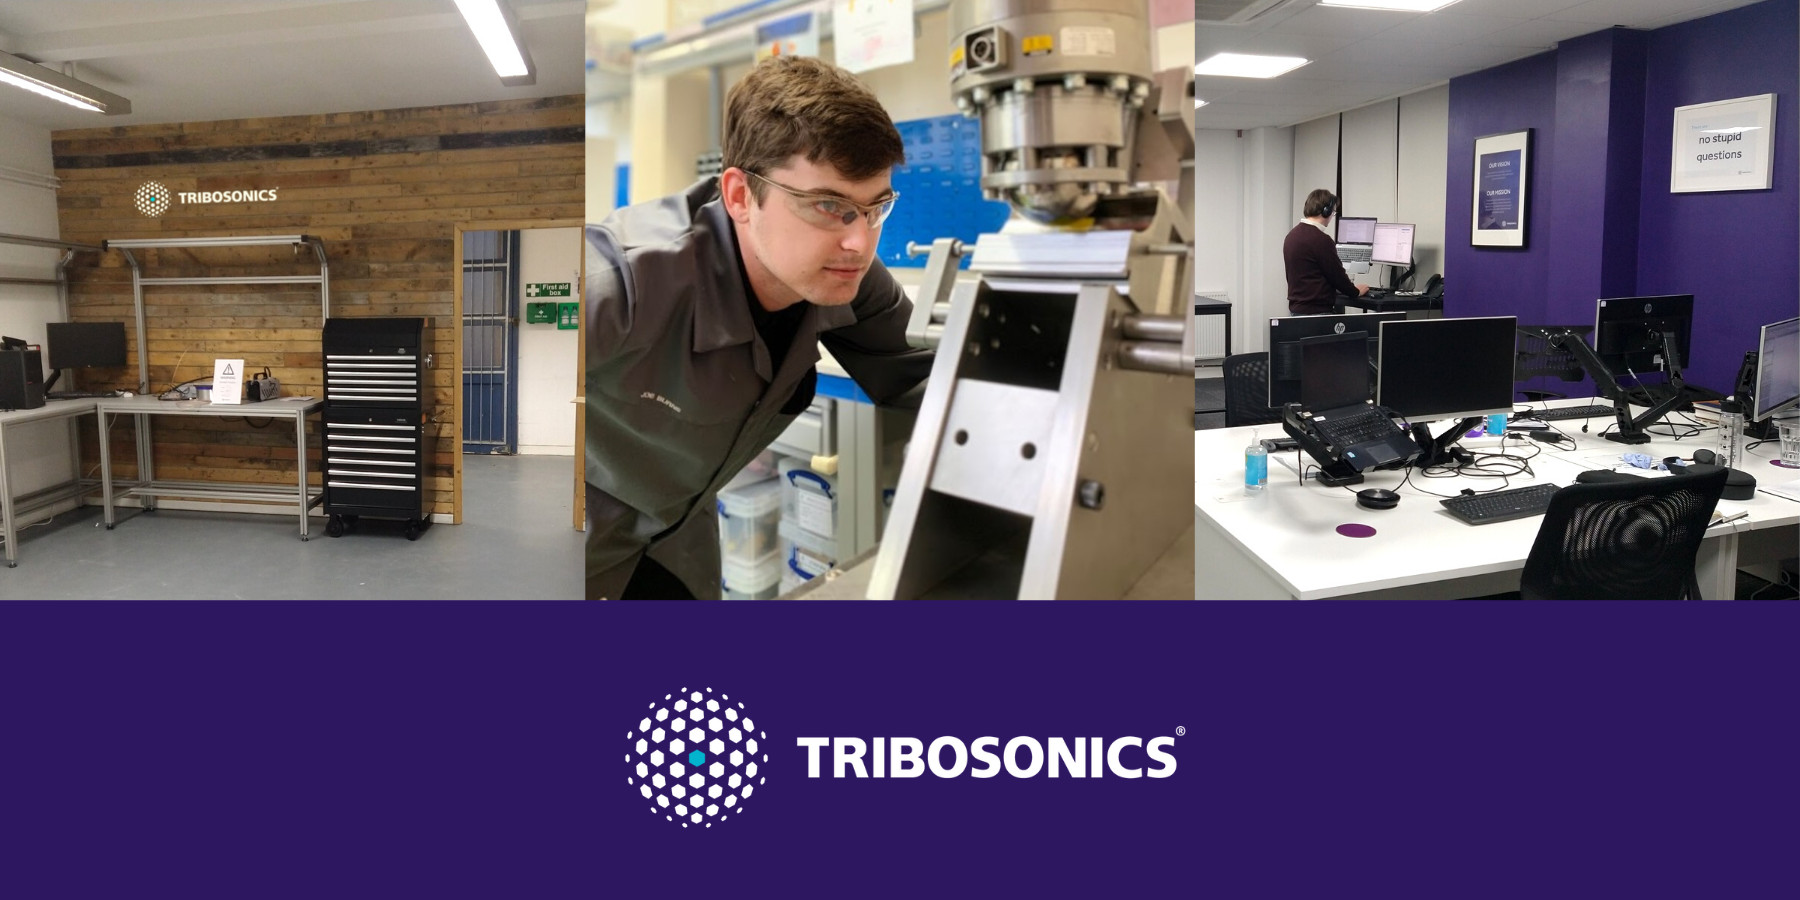 Tribosonics benefits from post-lockdown bounce back with support from Sheffield Technology Parks